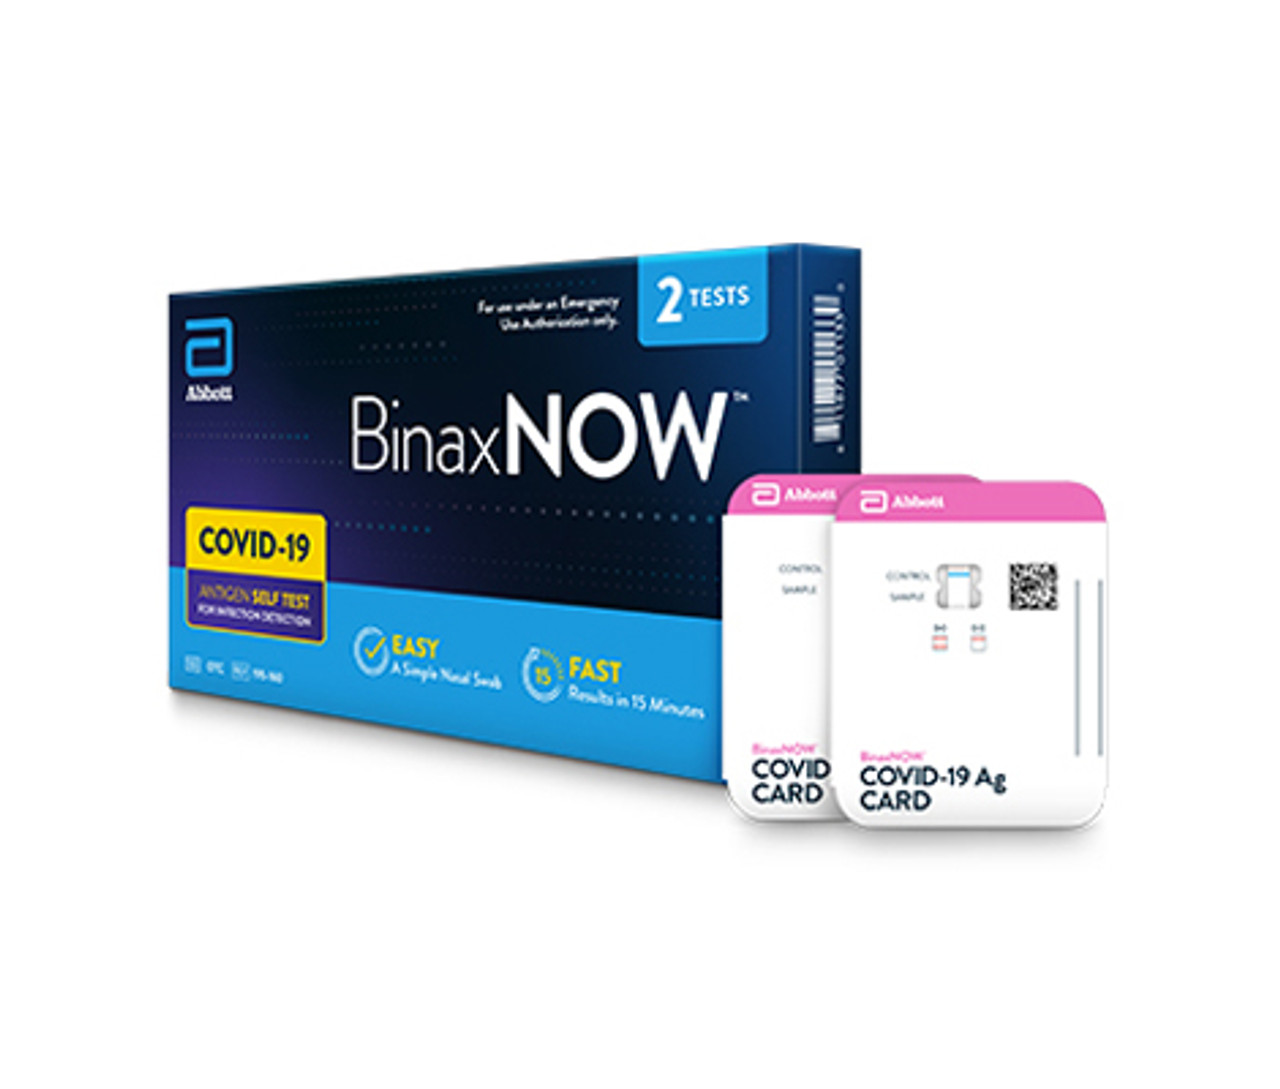 BinaxNOW: What You Need to Know